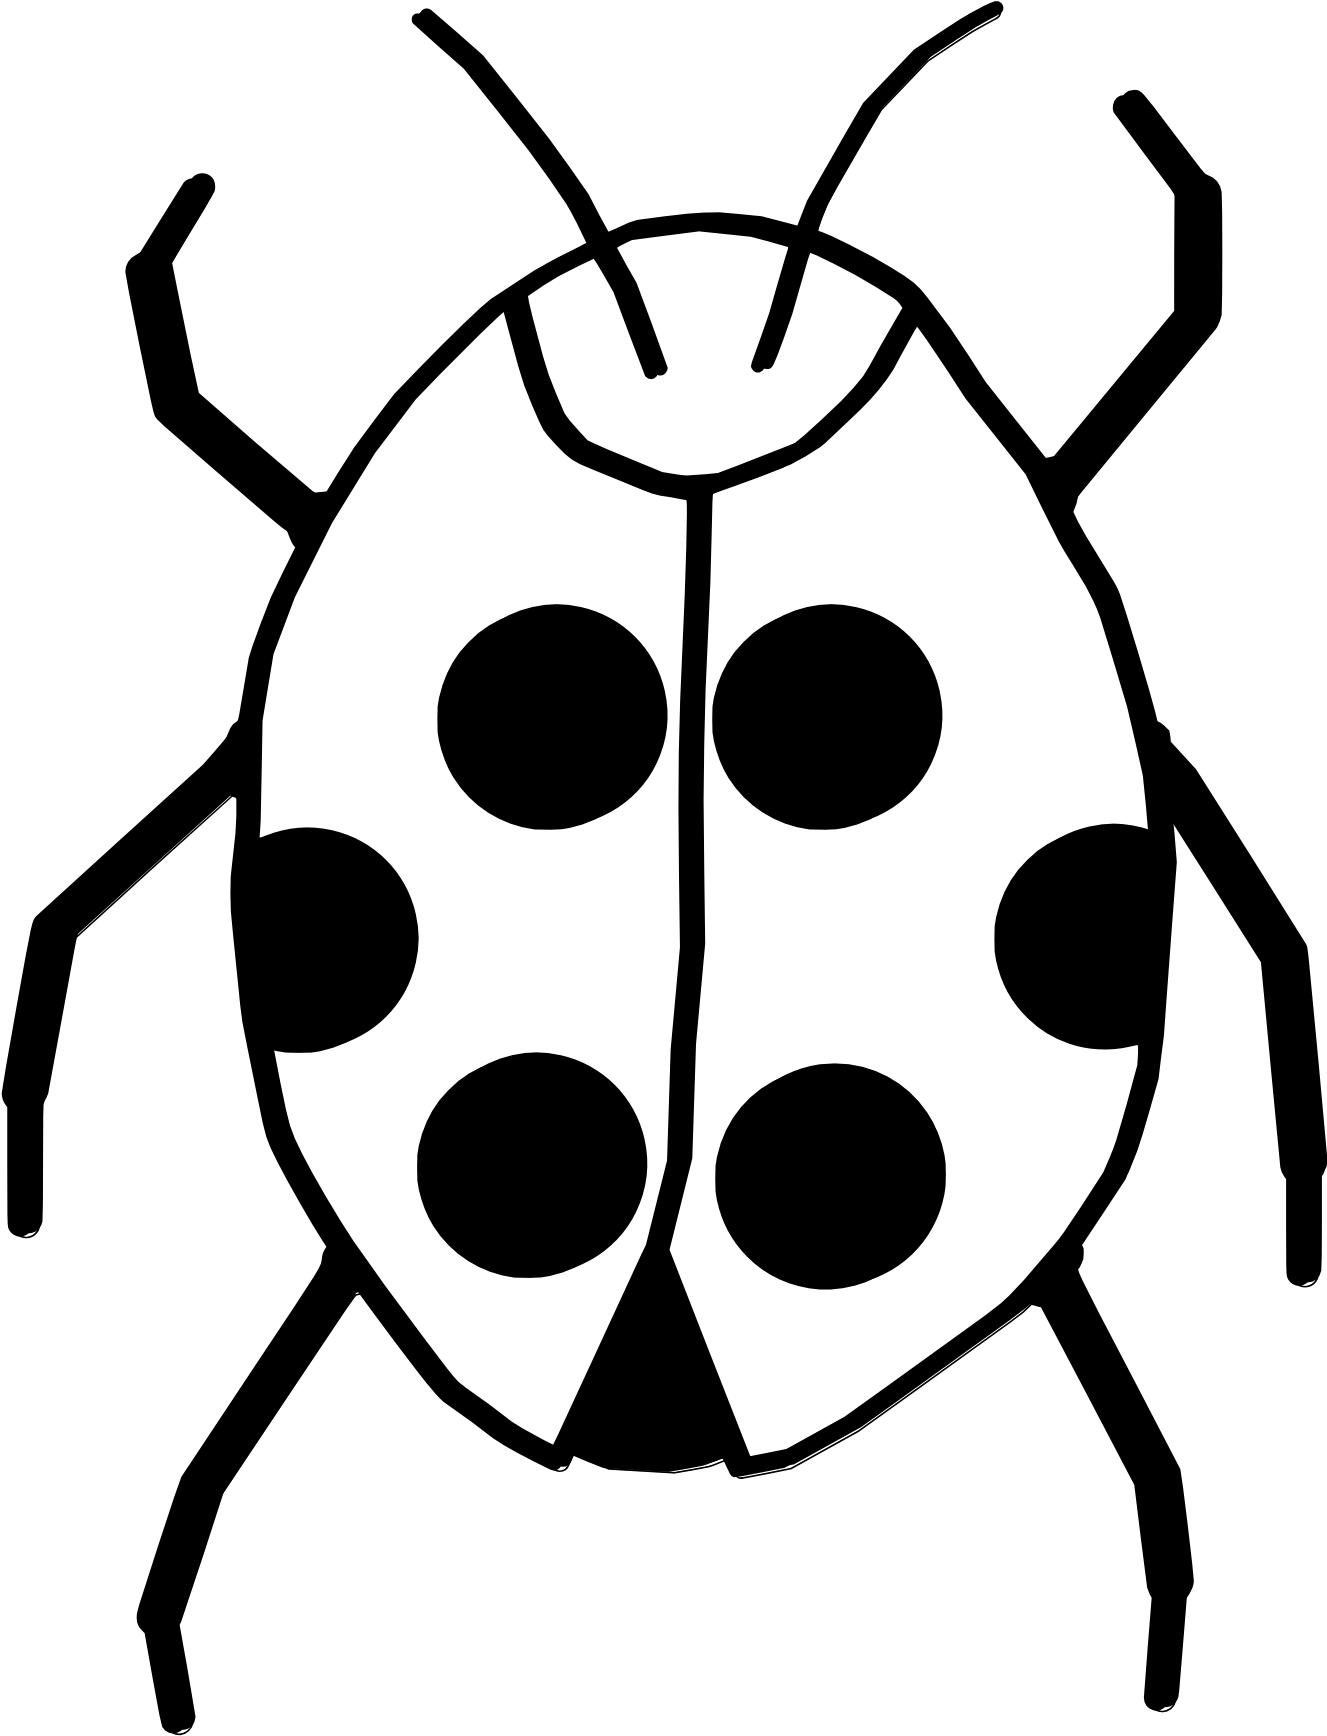 Images For Ladybug Clip Art Black And White - Clipart Of Bug Black And White (1331x1743)